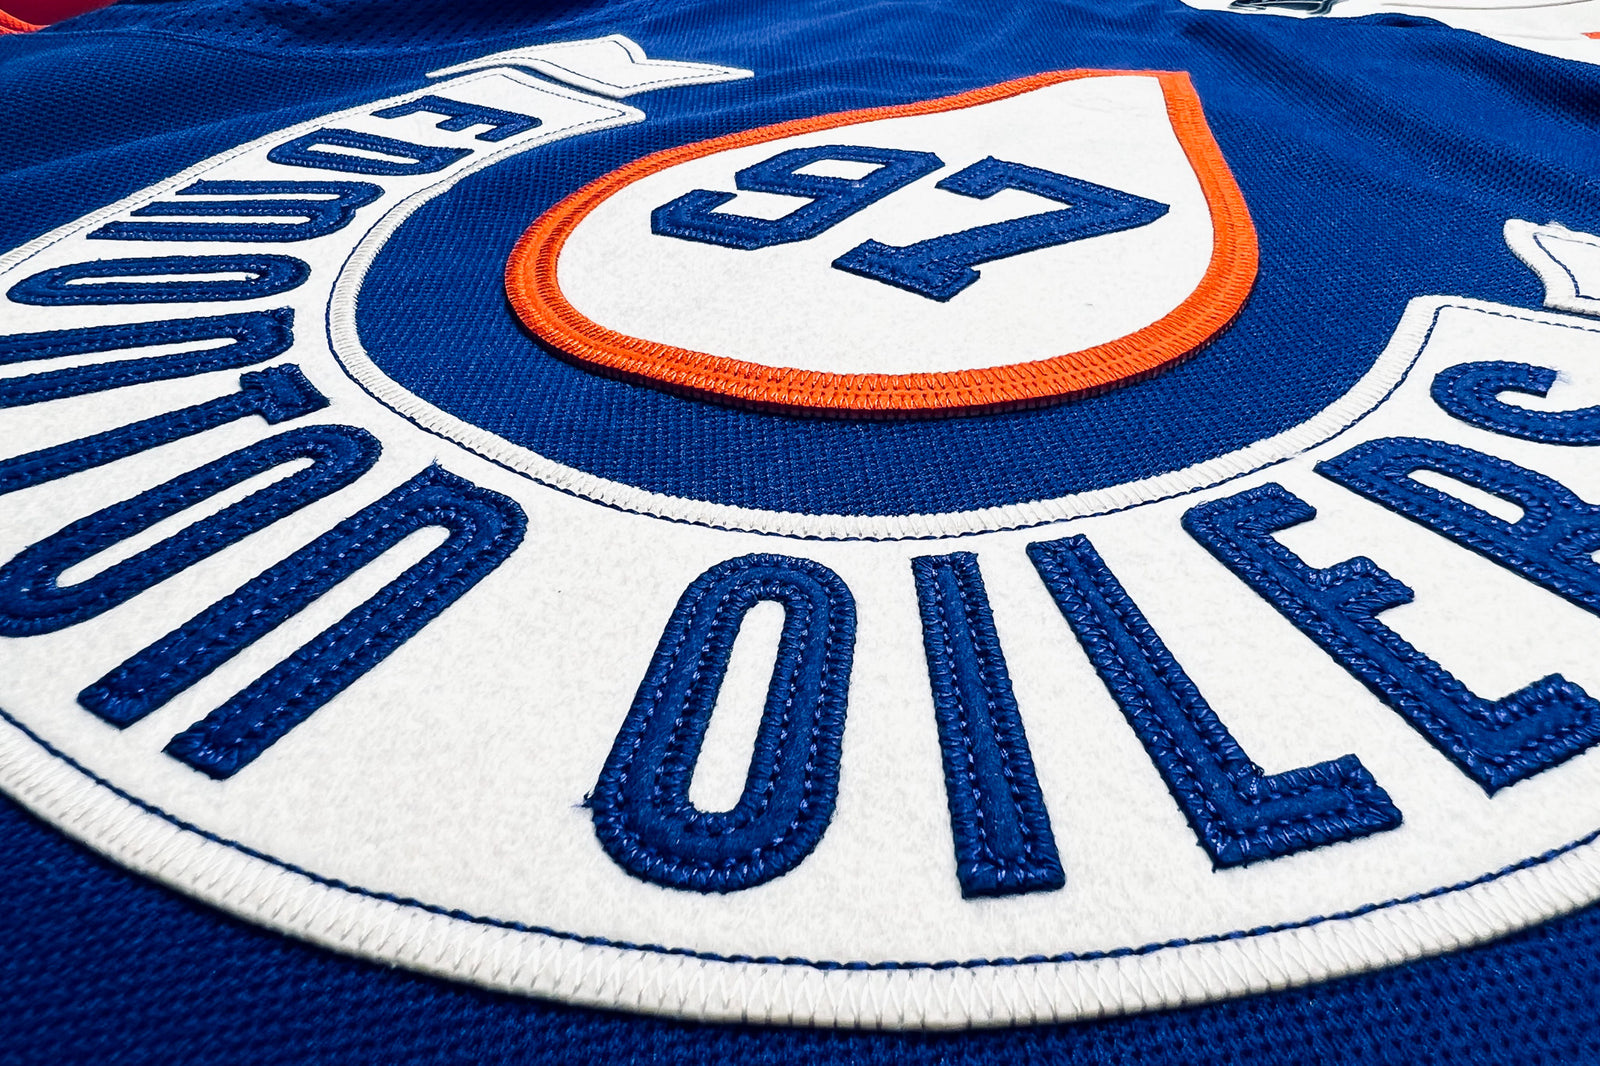 ANY NAME AND NUMBER EDMONTON OILERS 2023 HERITAGE CLASSIC AUTHENTIC AD –  Hockey Authentic